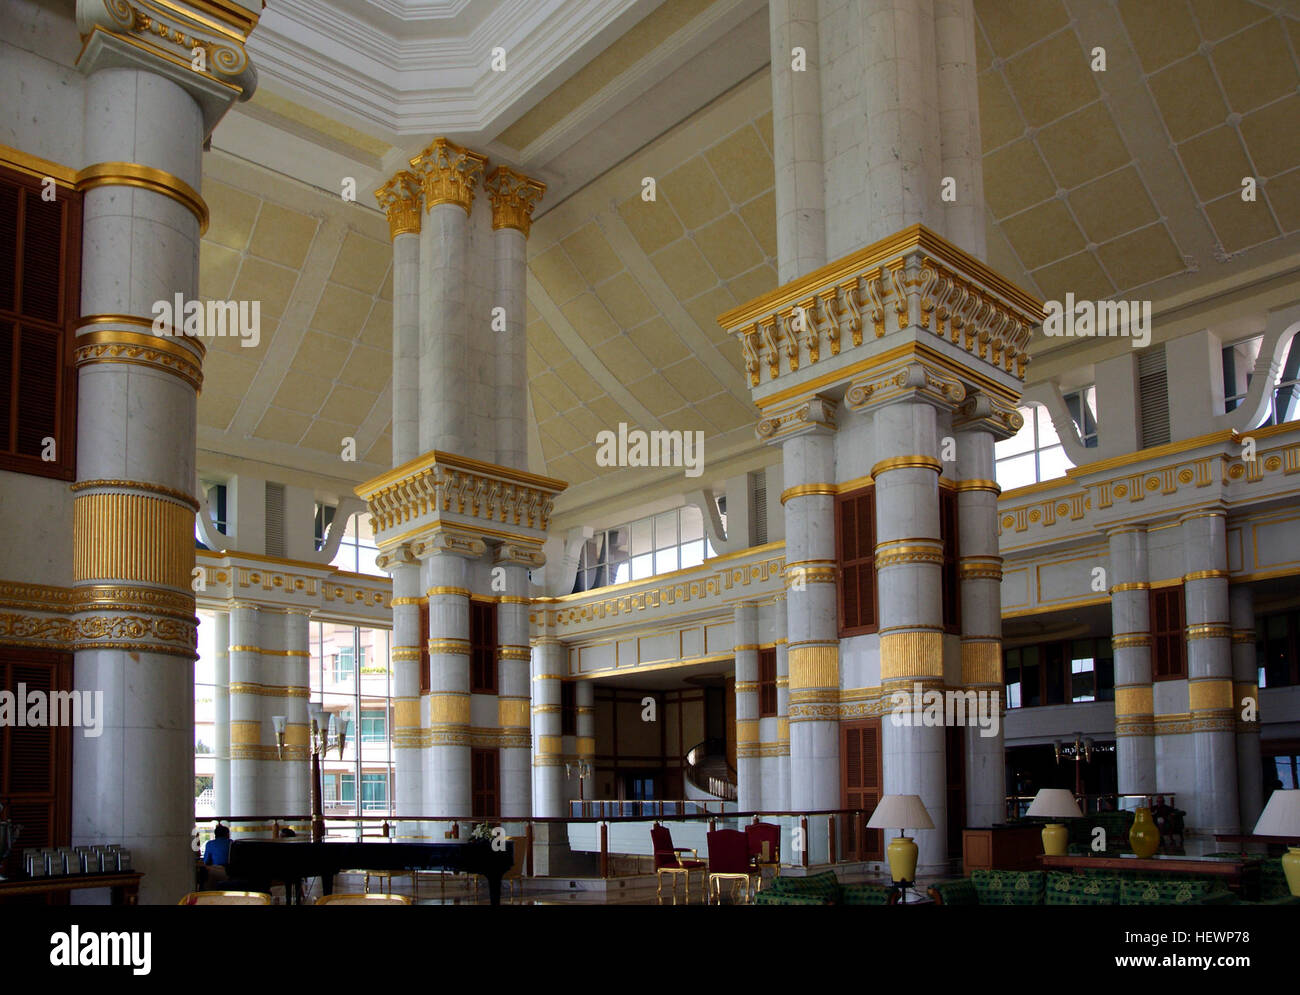 Ication (,), 5 Sterne, Brunei, Empire Hotel and Country Club., Architektur, Luxus-Resort, hotel Stockfoto